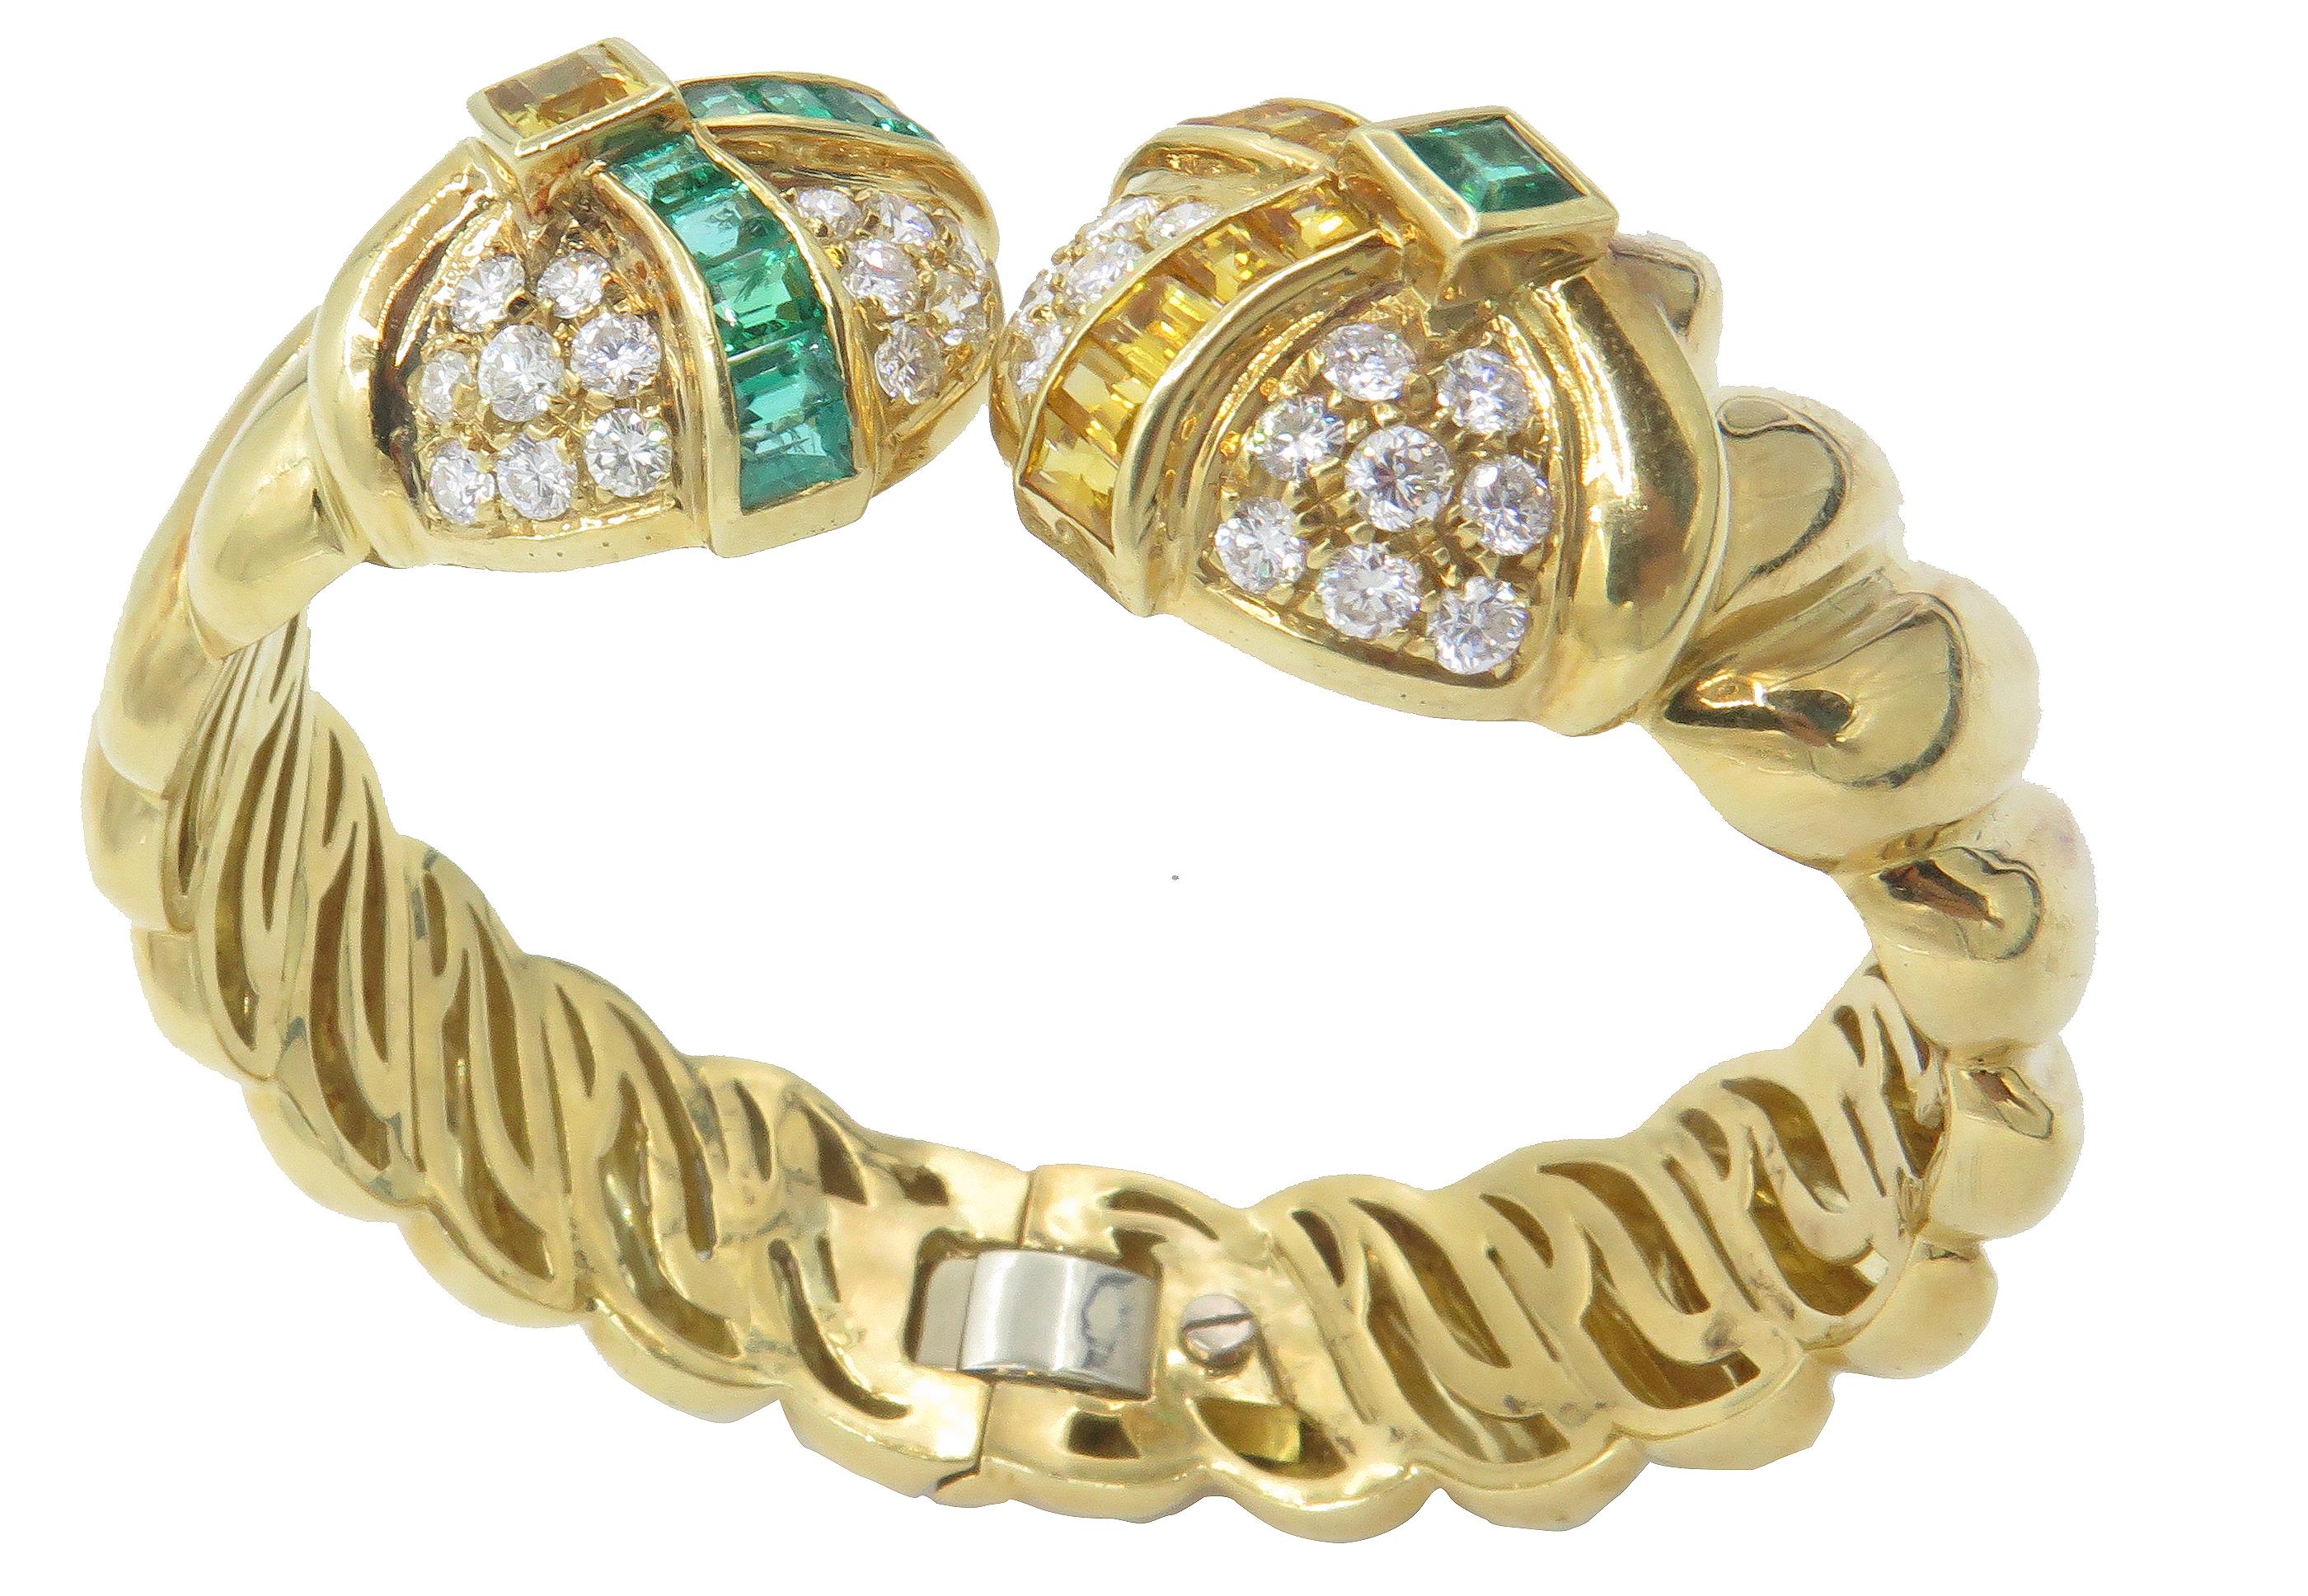 An exquisite 18K yellow gold hinged bangle with approximately 3cts of diamonds and 1.25cts of fine cut emeralds.. This charming piece features sparkling white diamonds mounted inbetween rows of channel-set emeralds and citrine. The intricately